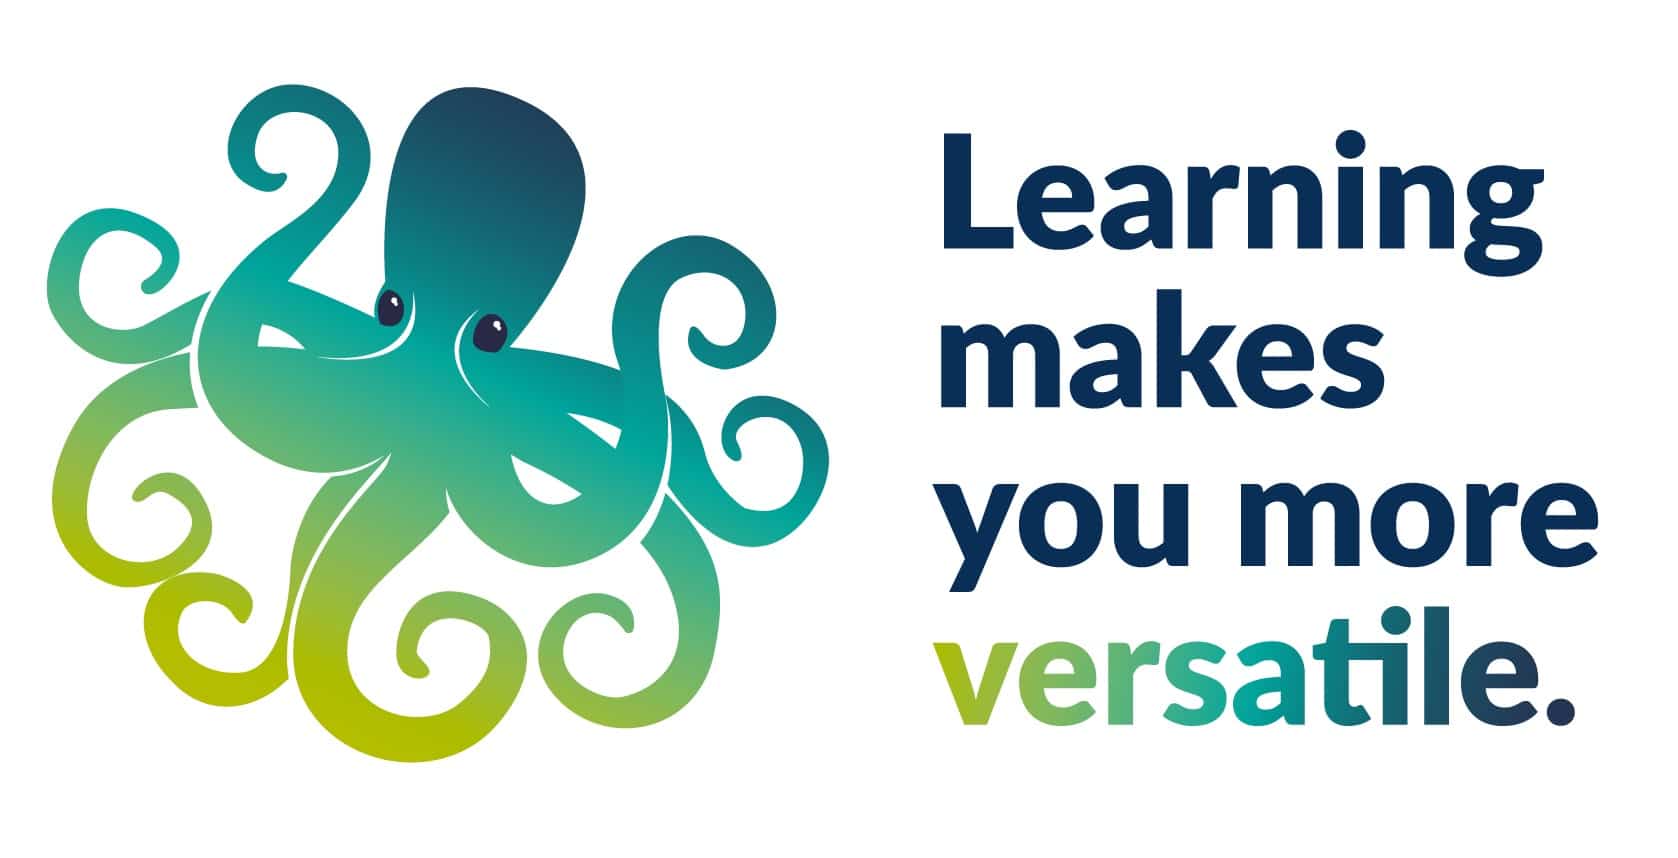 Learning makes you more versatile